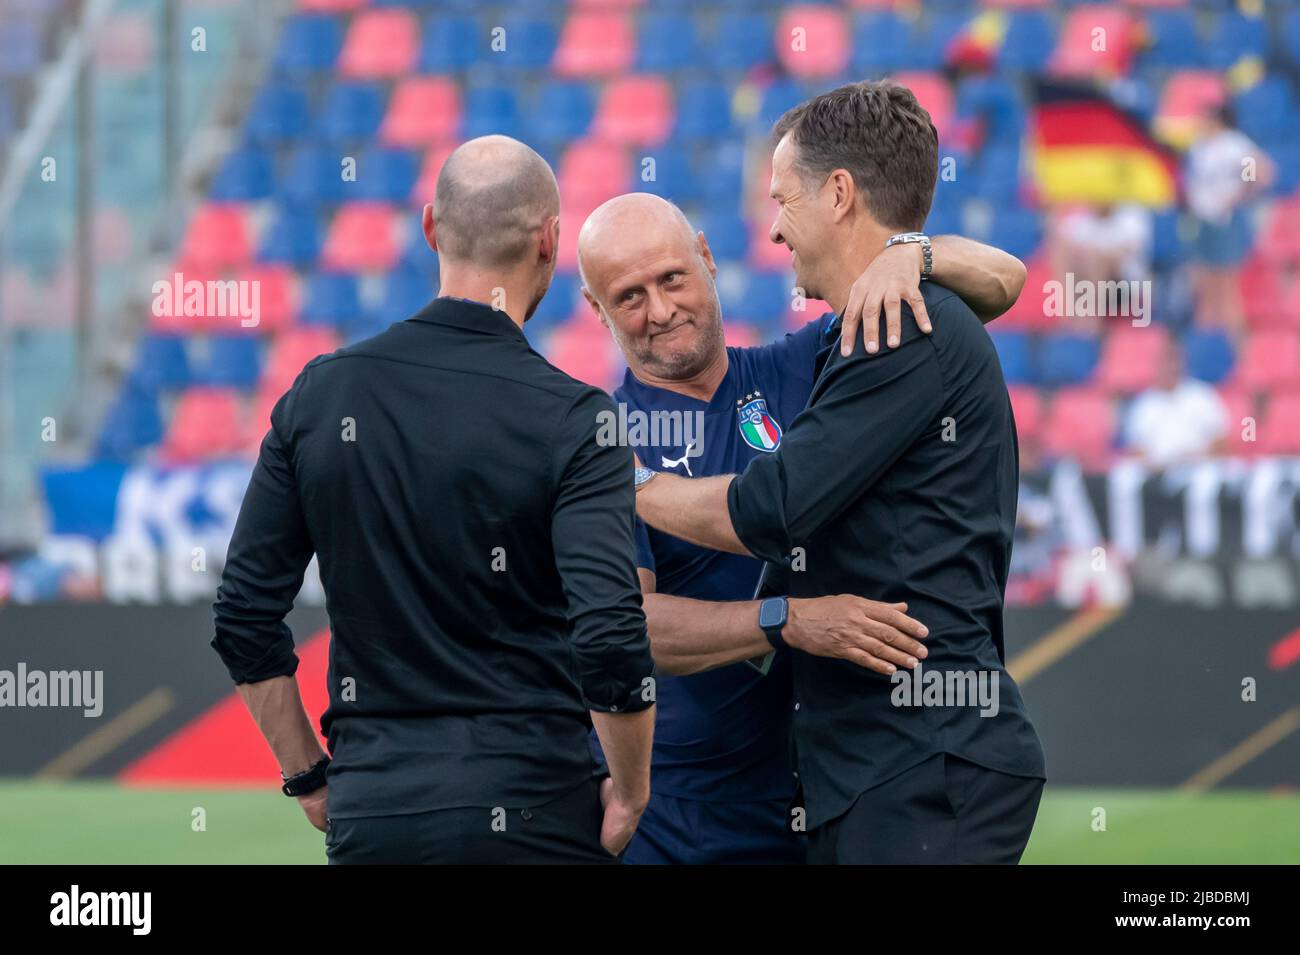 Bologna, Italy. June 4, 2022, Attilio Lombardo assistant coach (Italy) Oliver Bierhoff sports director (Germany) during the UEFA Natons League match between Italy 1-1 Germany at Stadio Renato Dall'Ara on June 4, 2022 in Bologna, Italy. Credit: Maurizio Borsari/AFLO/Alamy Live News Stock Photo